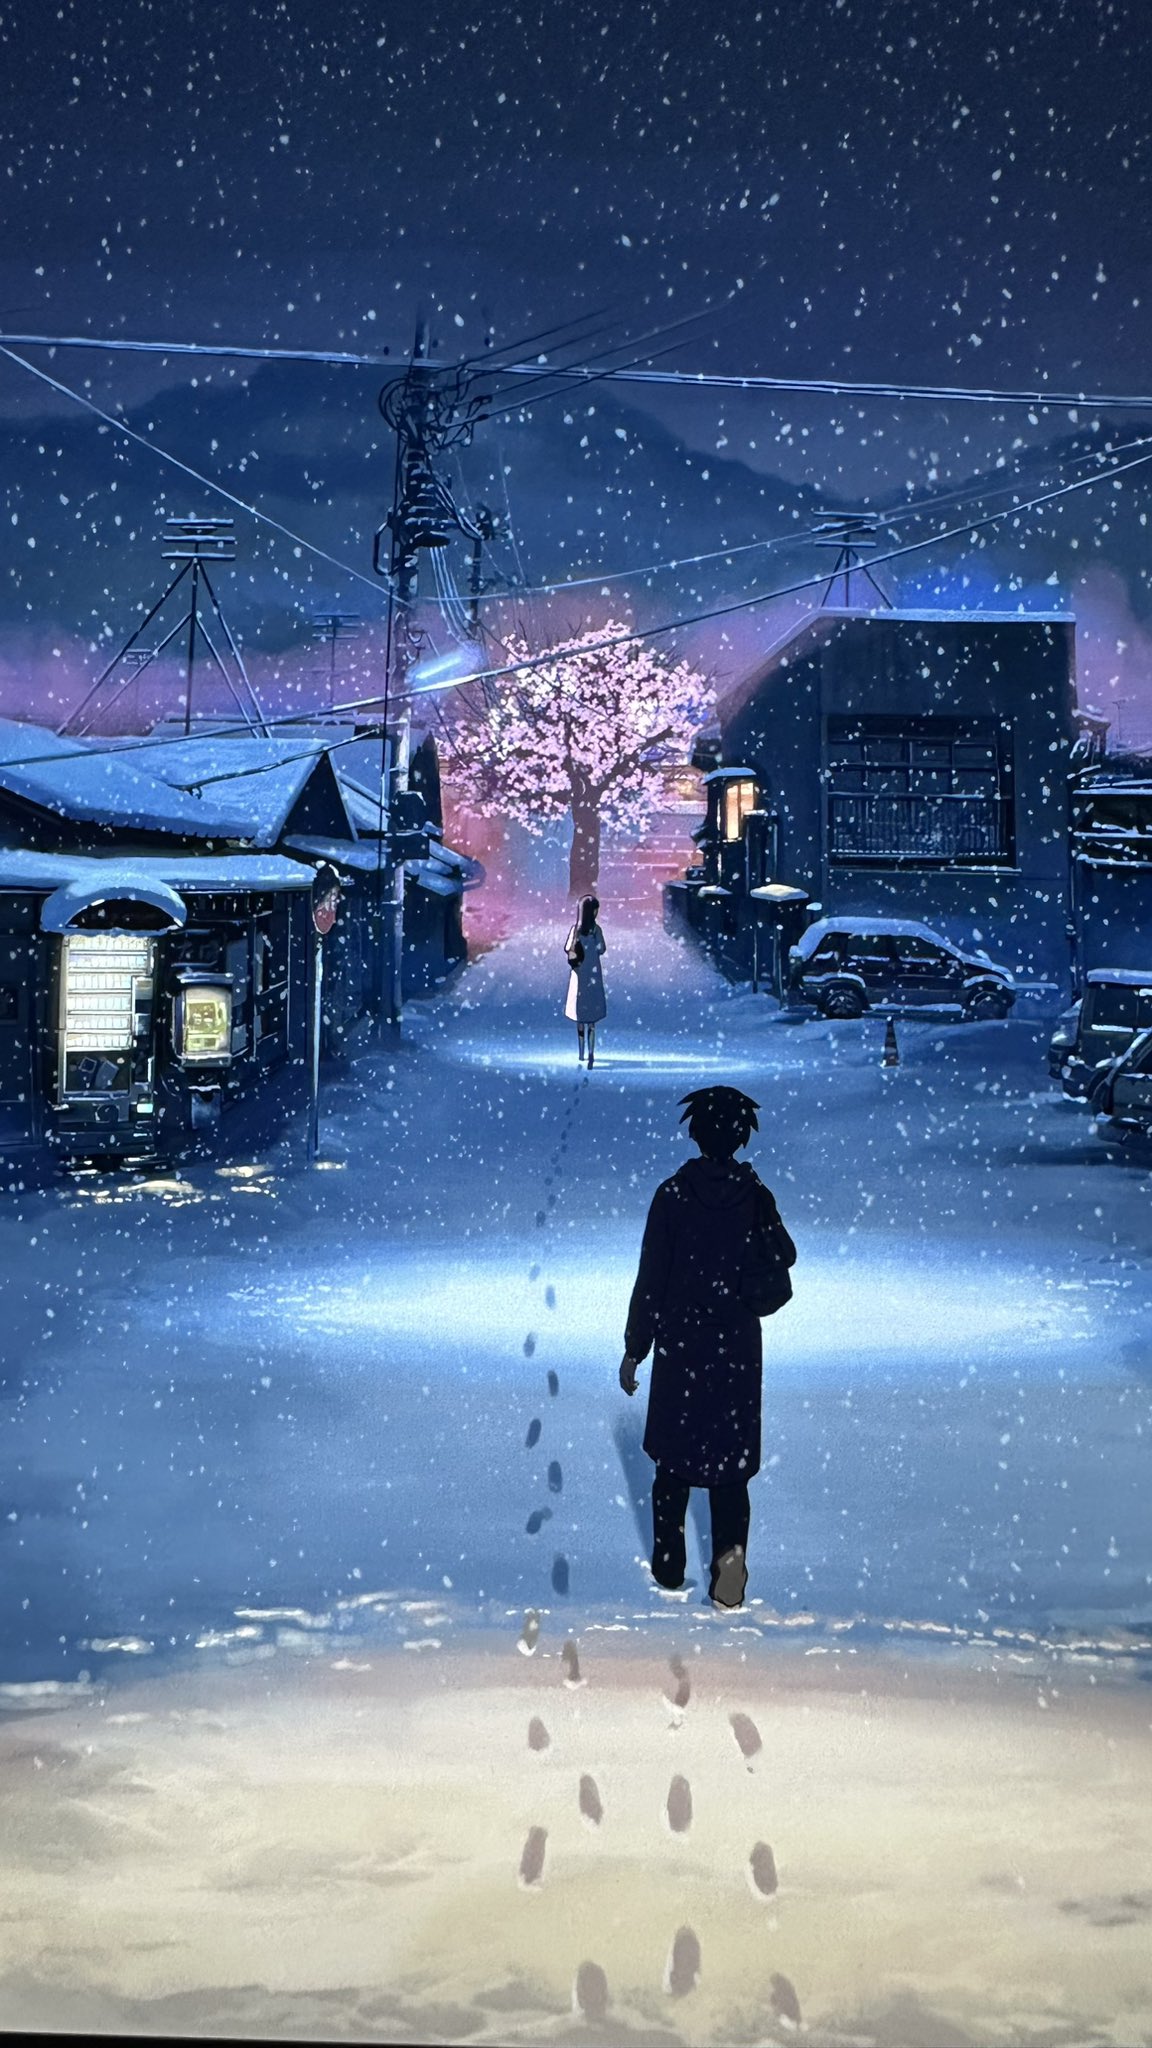 1boy 1girl building byousoku_5_centimeter car character_request coat footprints full_body highres house motor_vehicle night night_sky outdoors power_lines road scenery shinkai_makoto sky snowflakes snowing street town tree utility_pole winter winter_clothes winter_coat